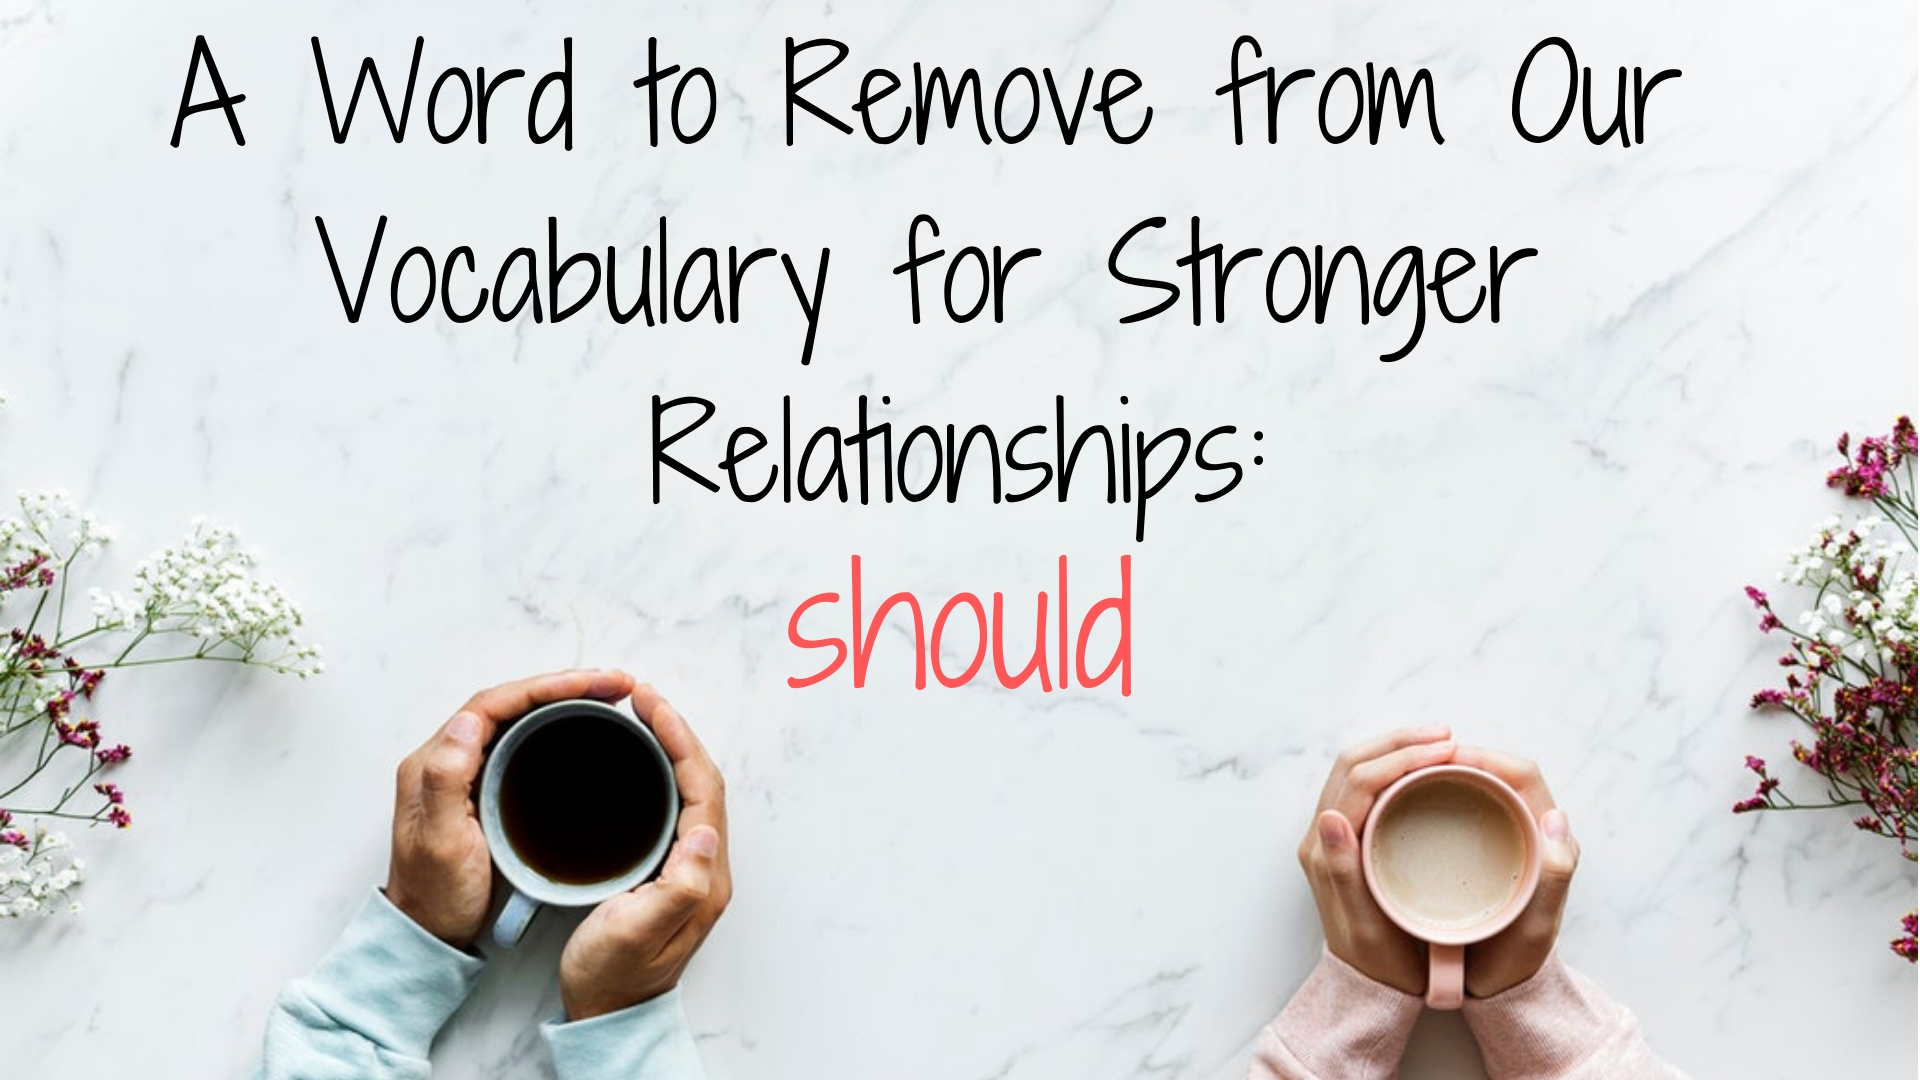 236: A Word to Remove from Our Vocabulary for Stronger Relationships – Should